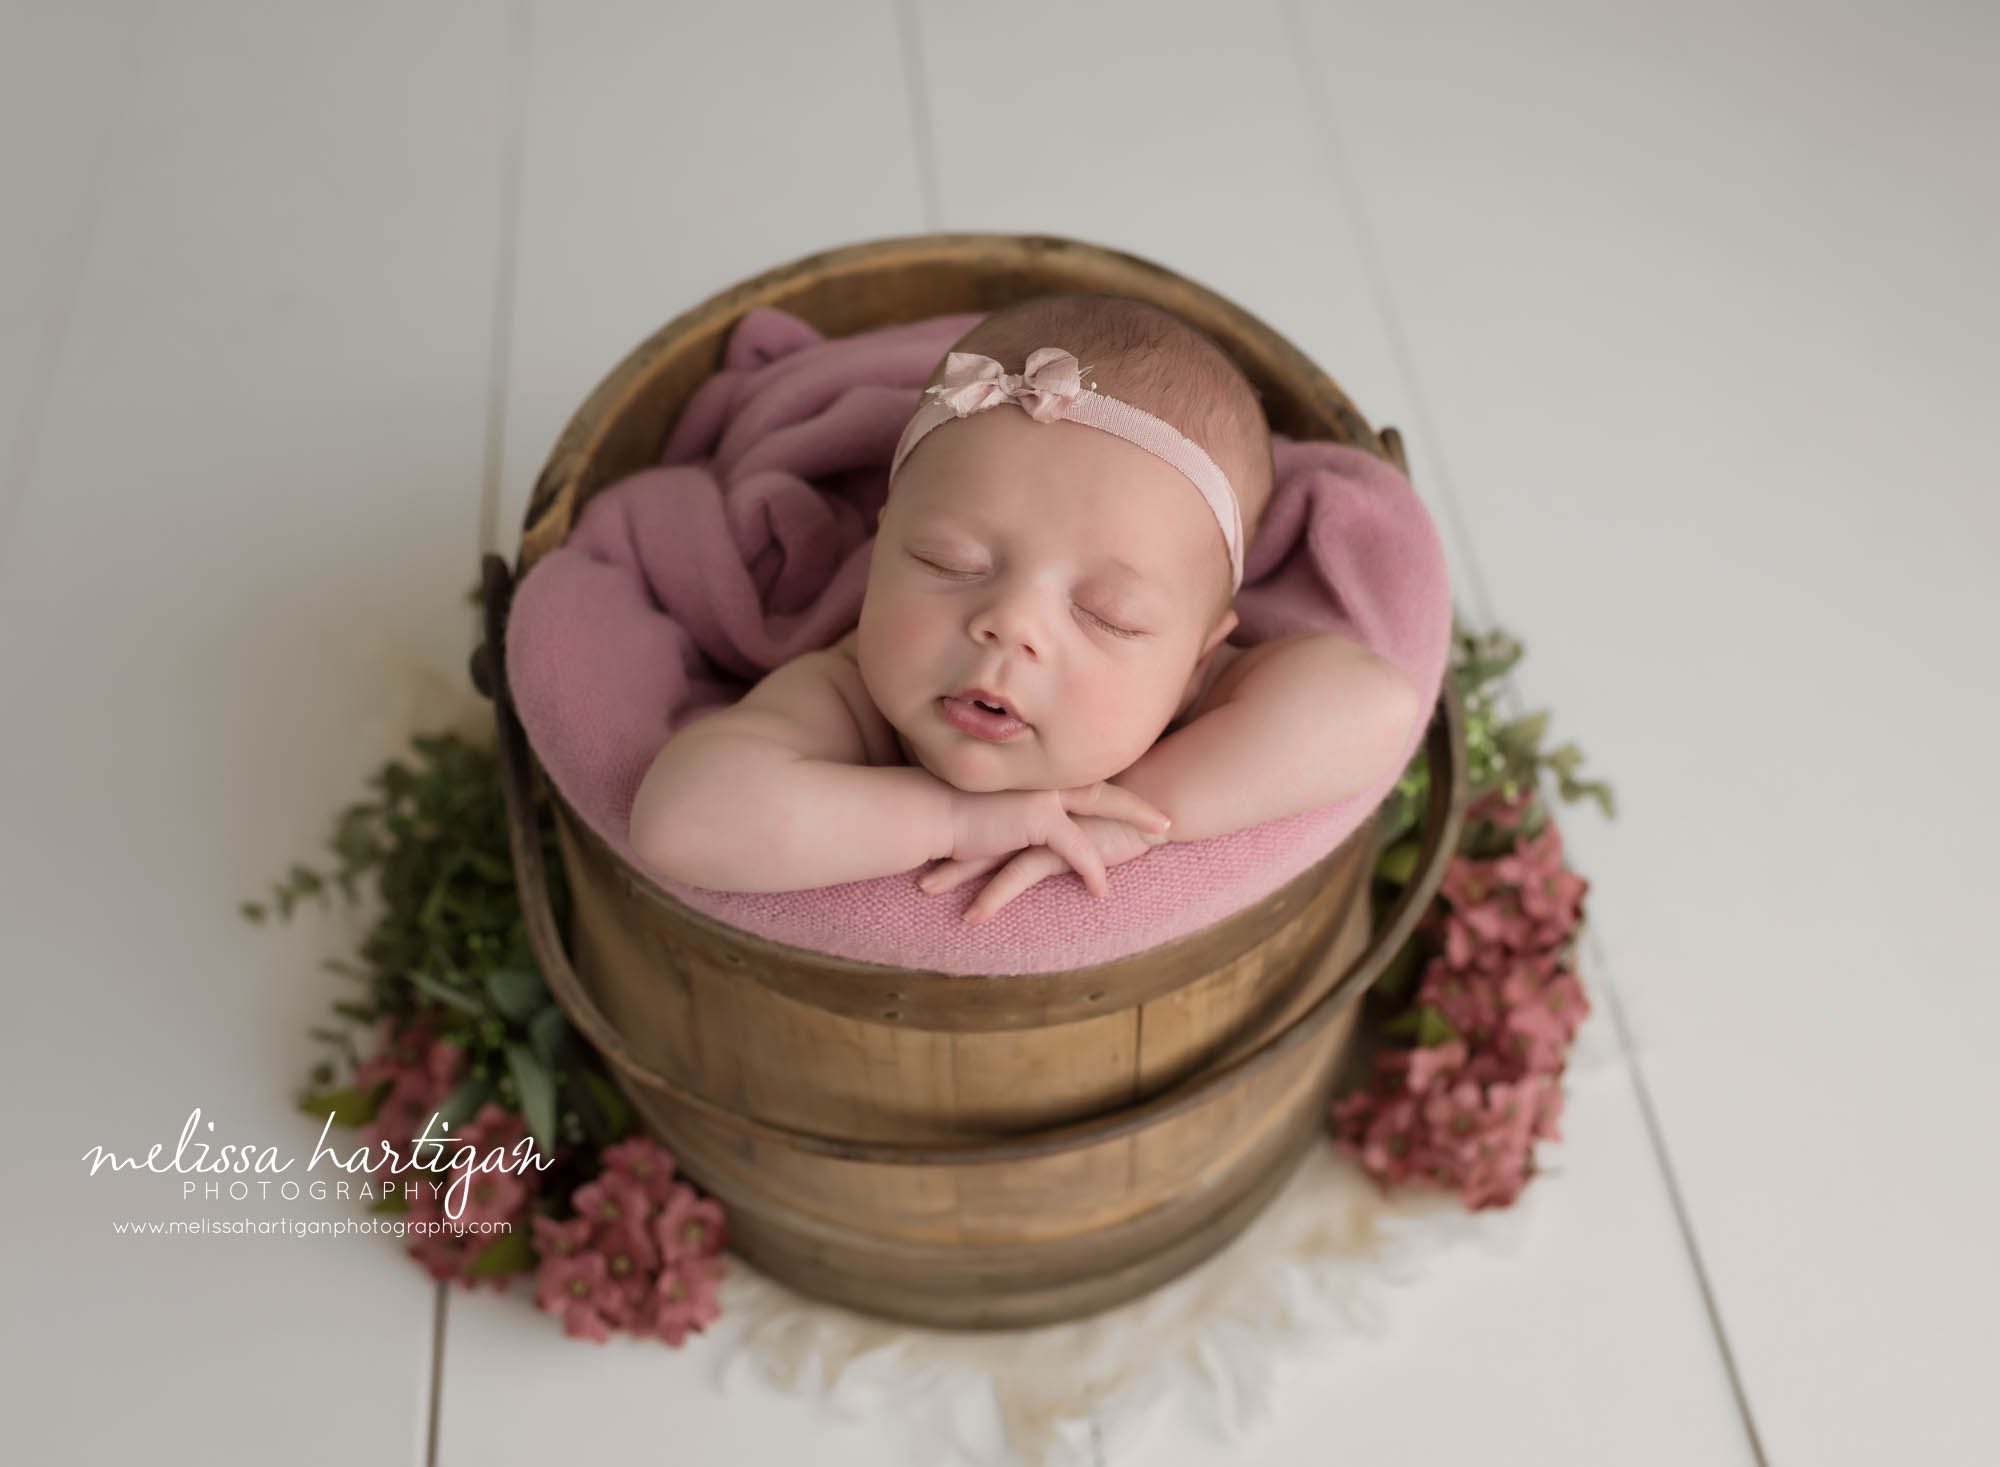 newborn baby girl posed in wooden bucket with rose pink layer and pink headband